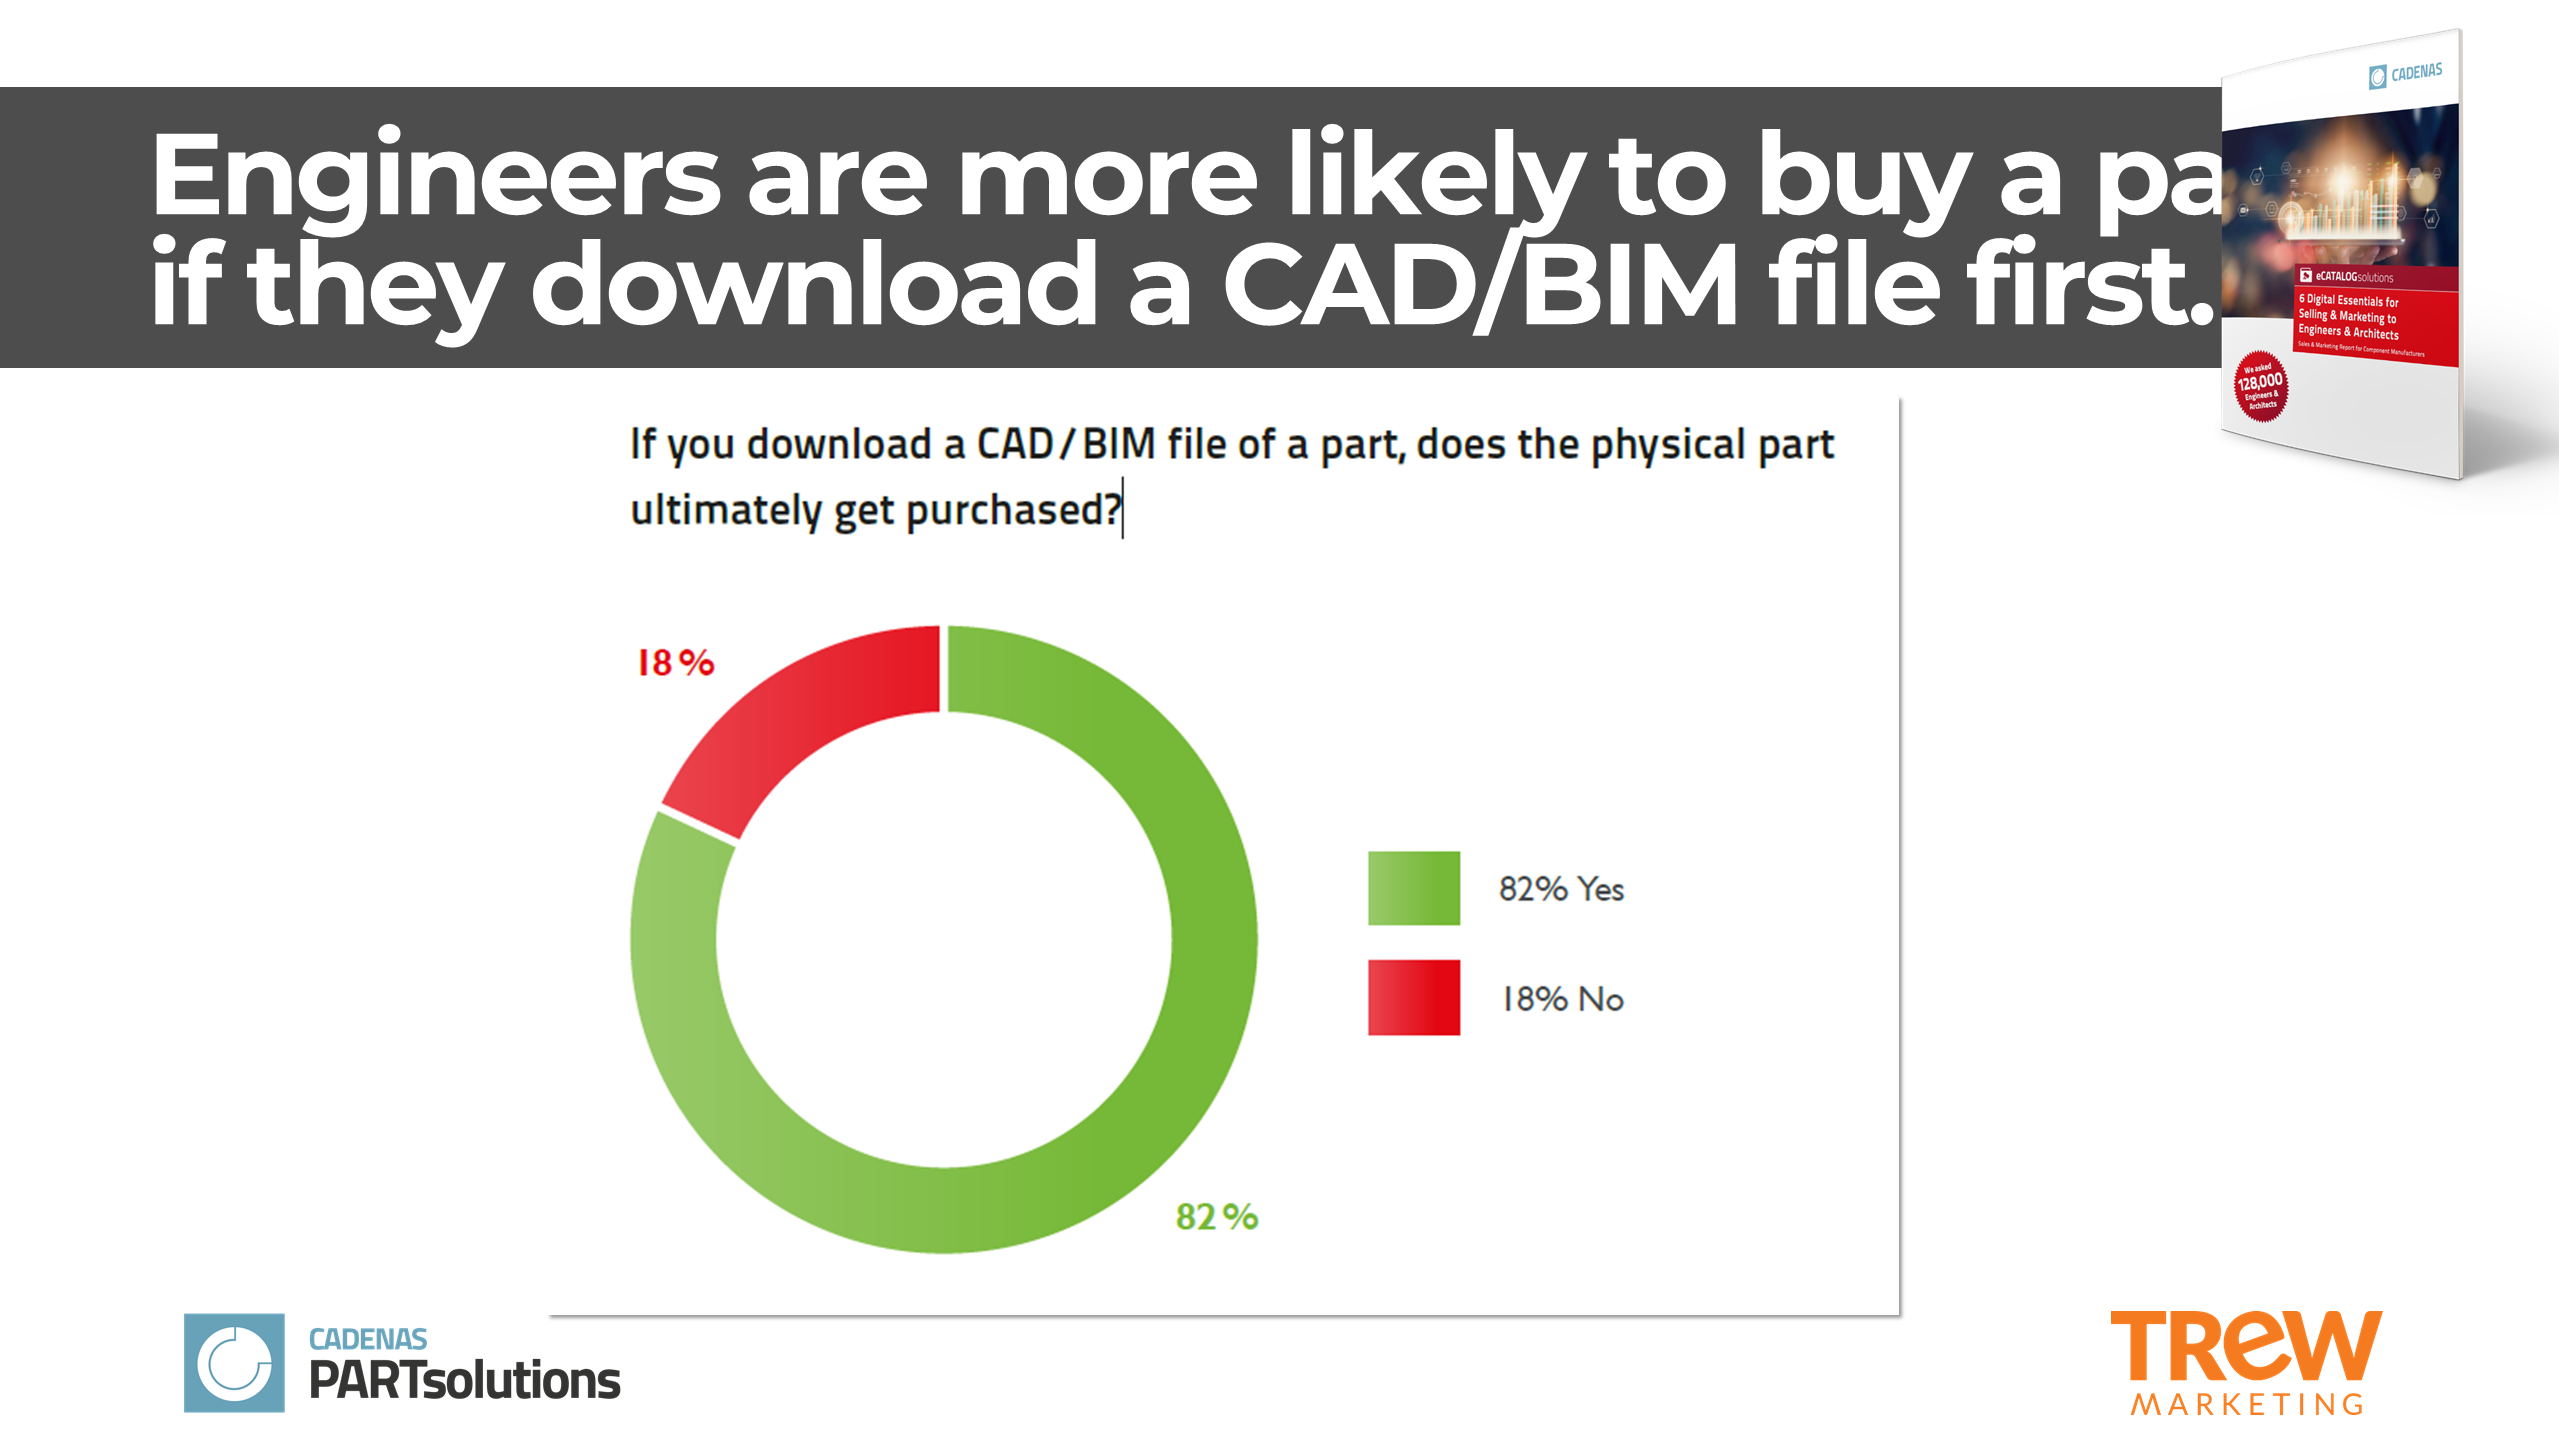 Industrial Marketing Content: How often does a CAD or BIM model lead to a purchase